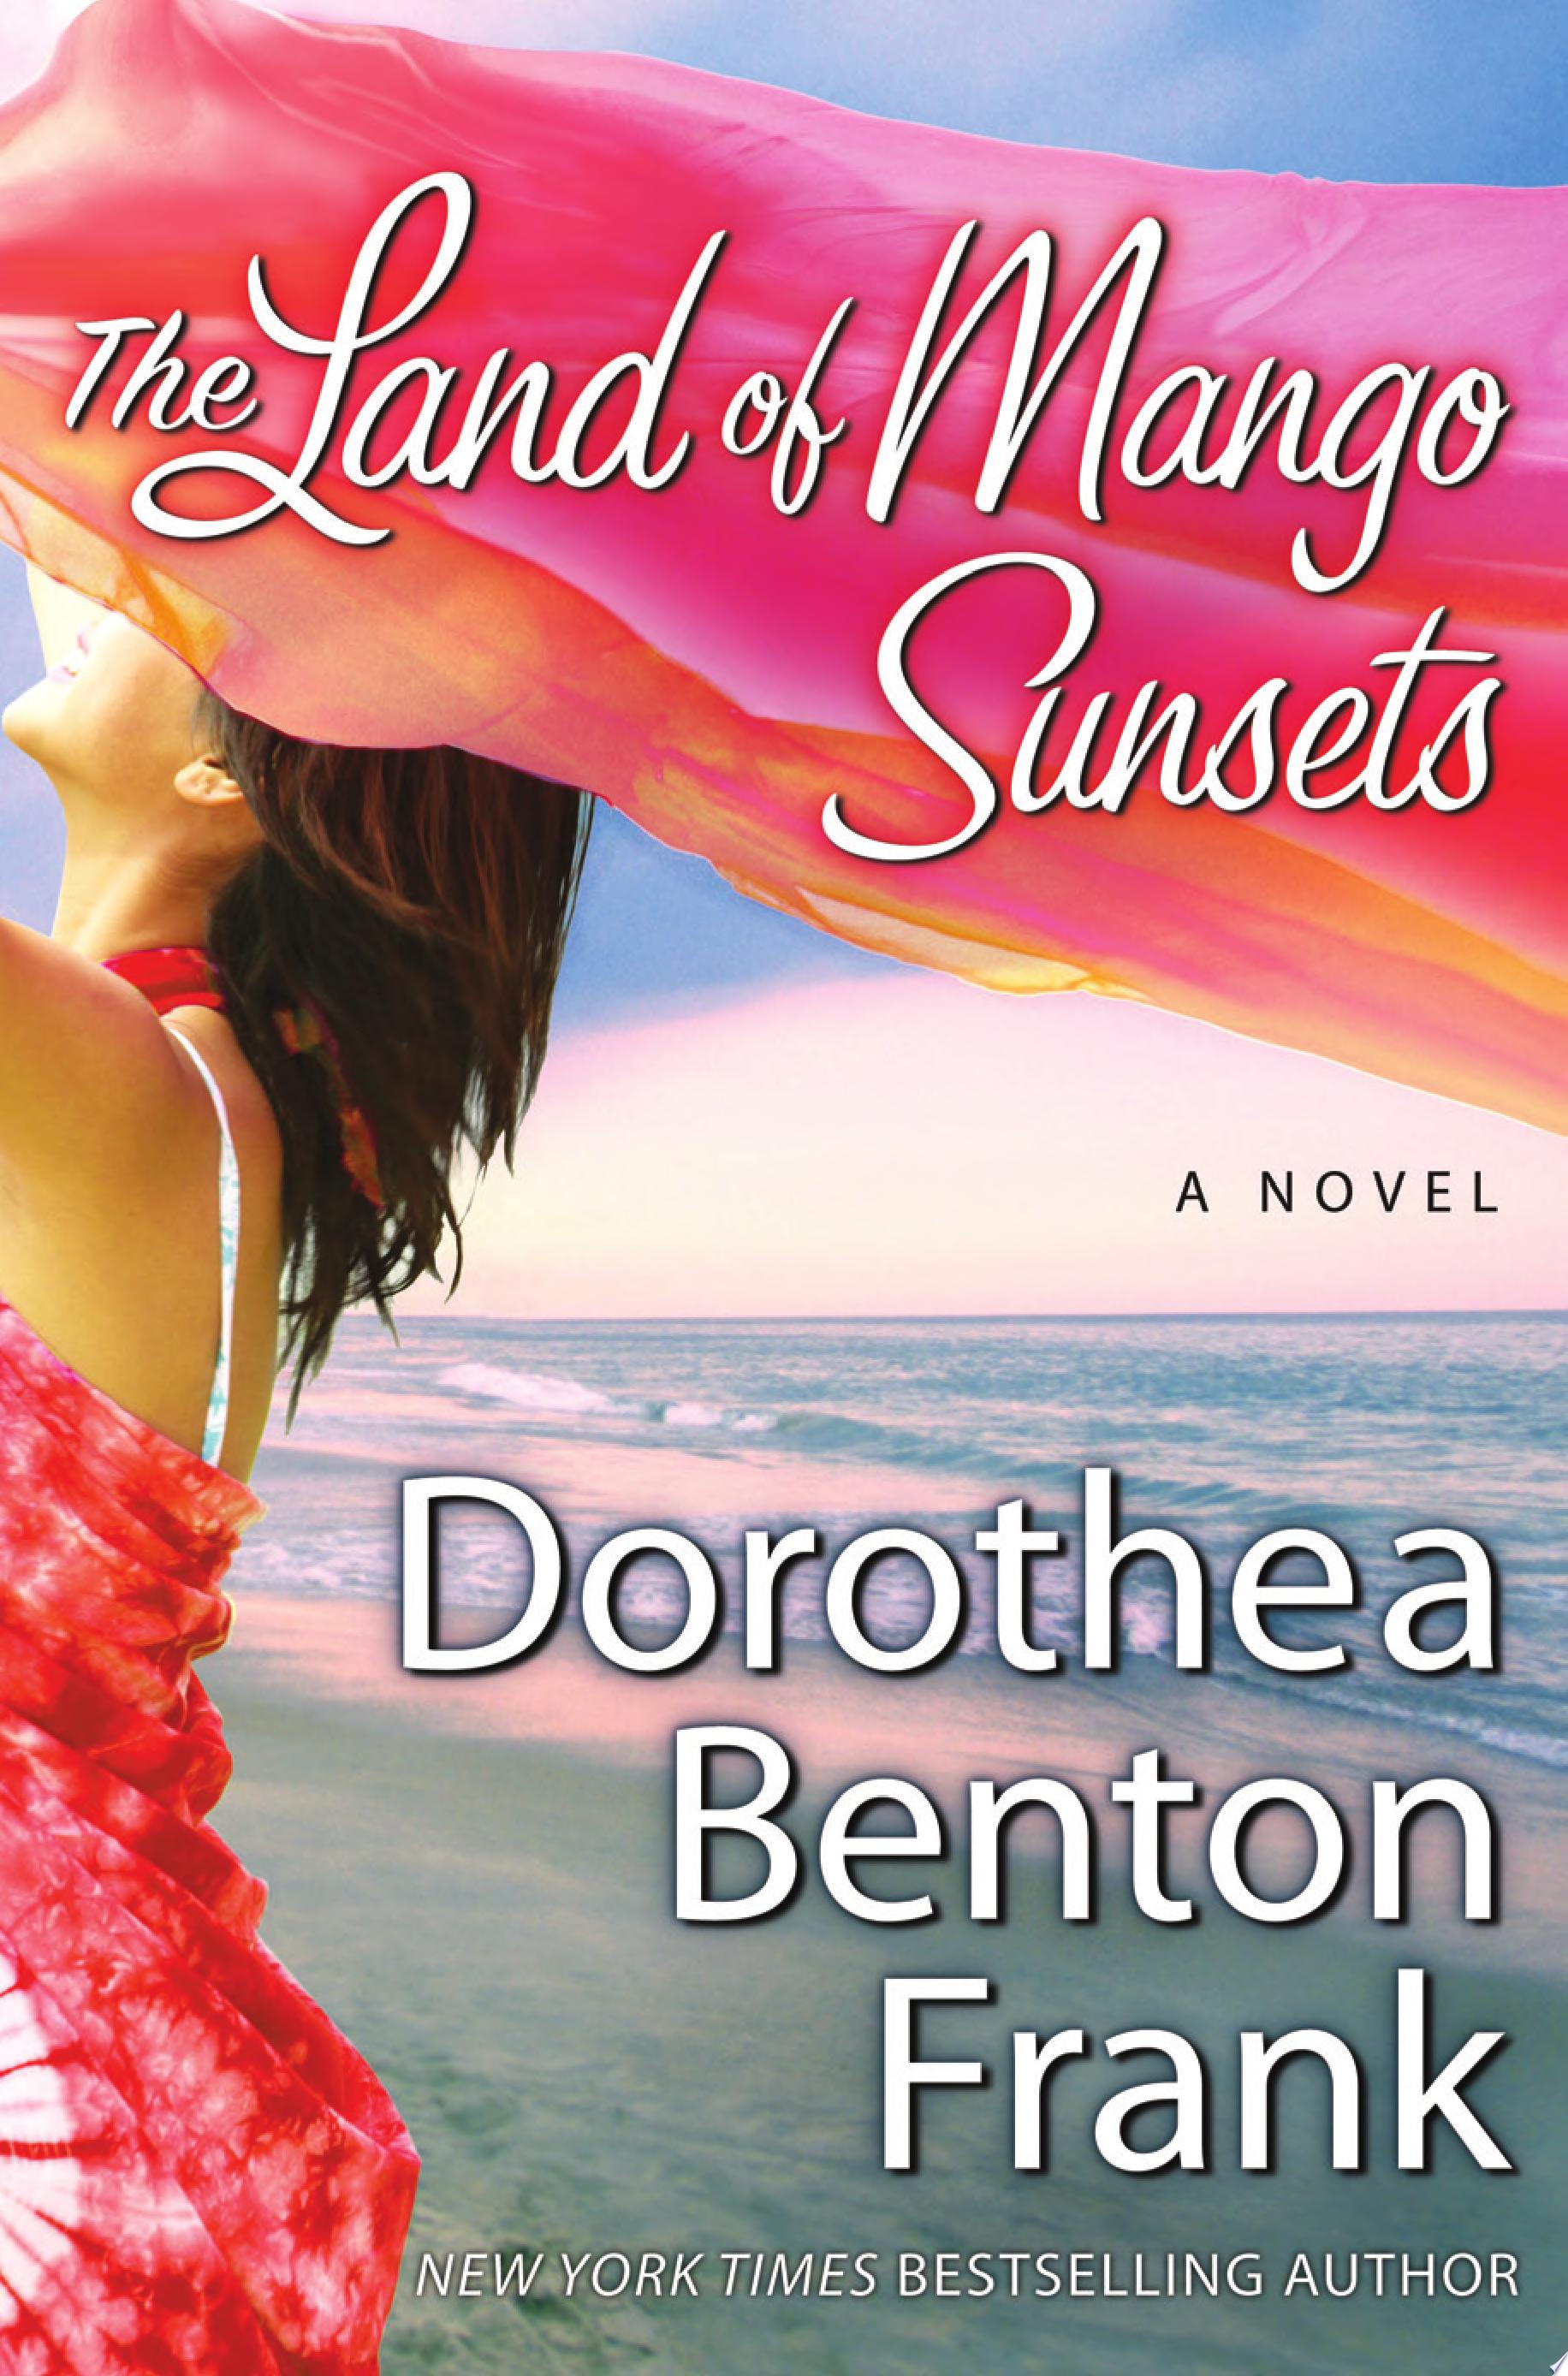 Image for "The Land of Mango Sunsets"